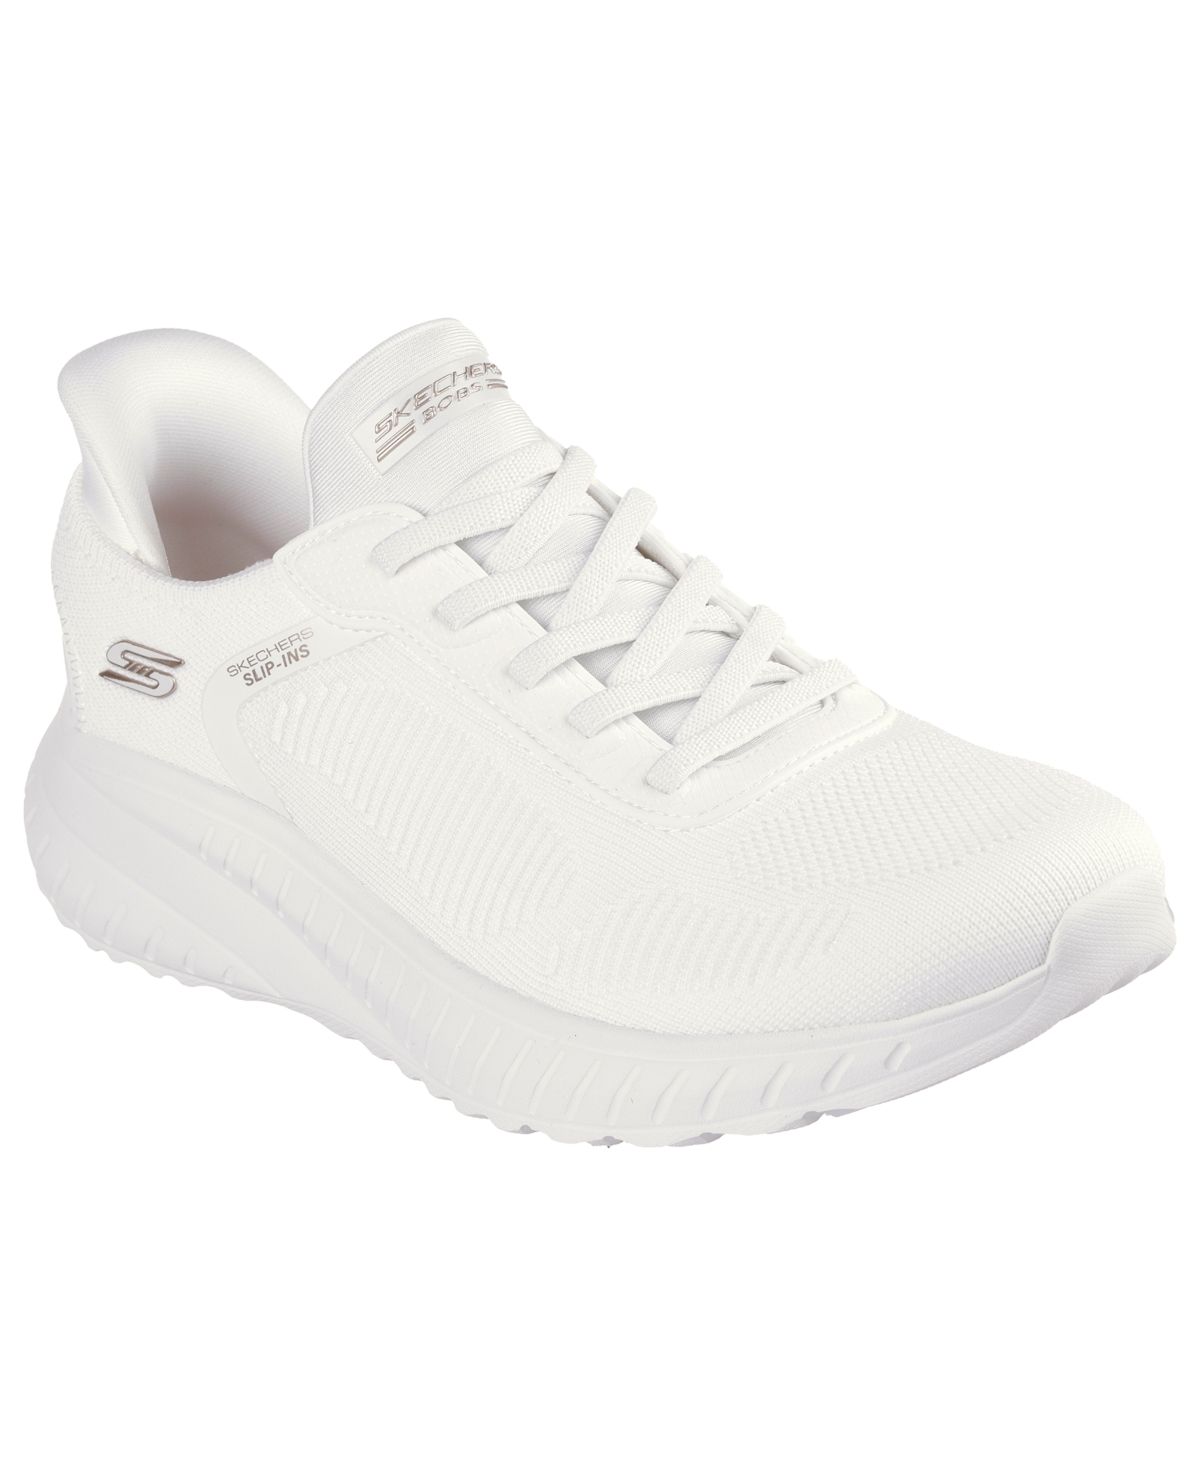 Women's Walking Sneakers from Finish Line - Off White